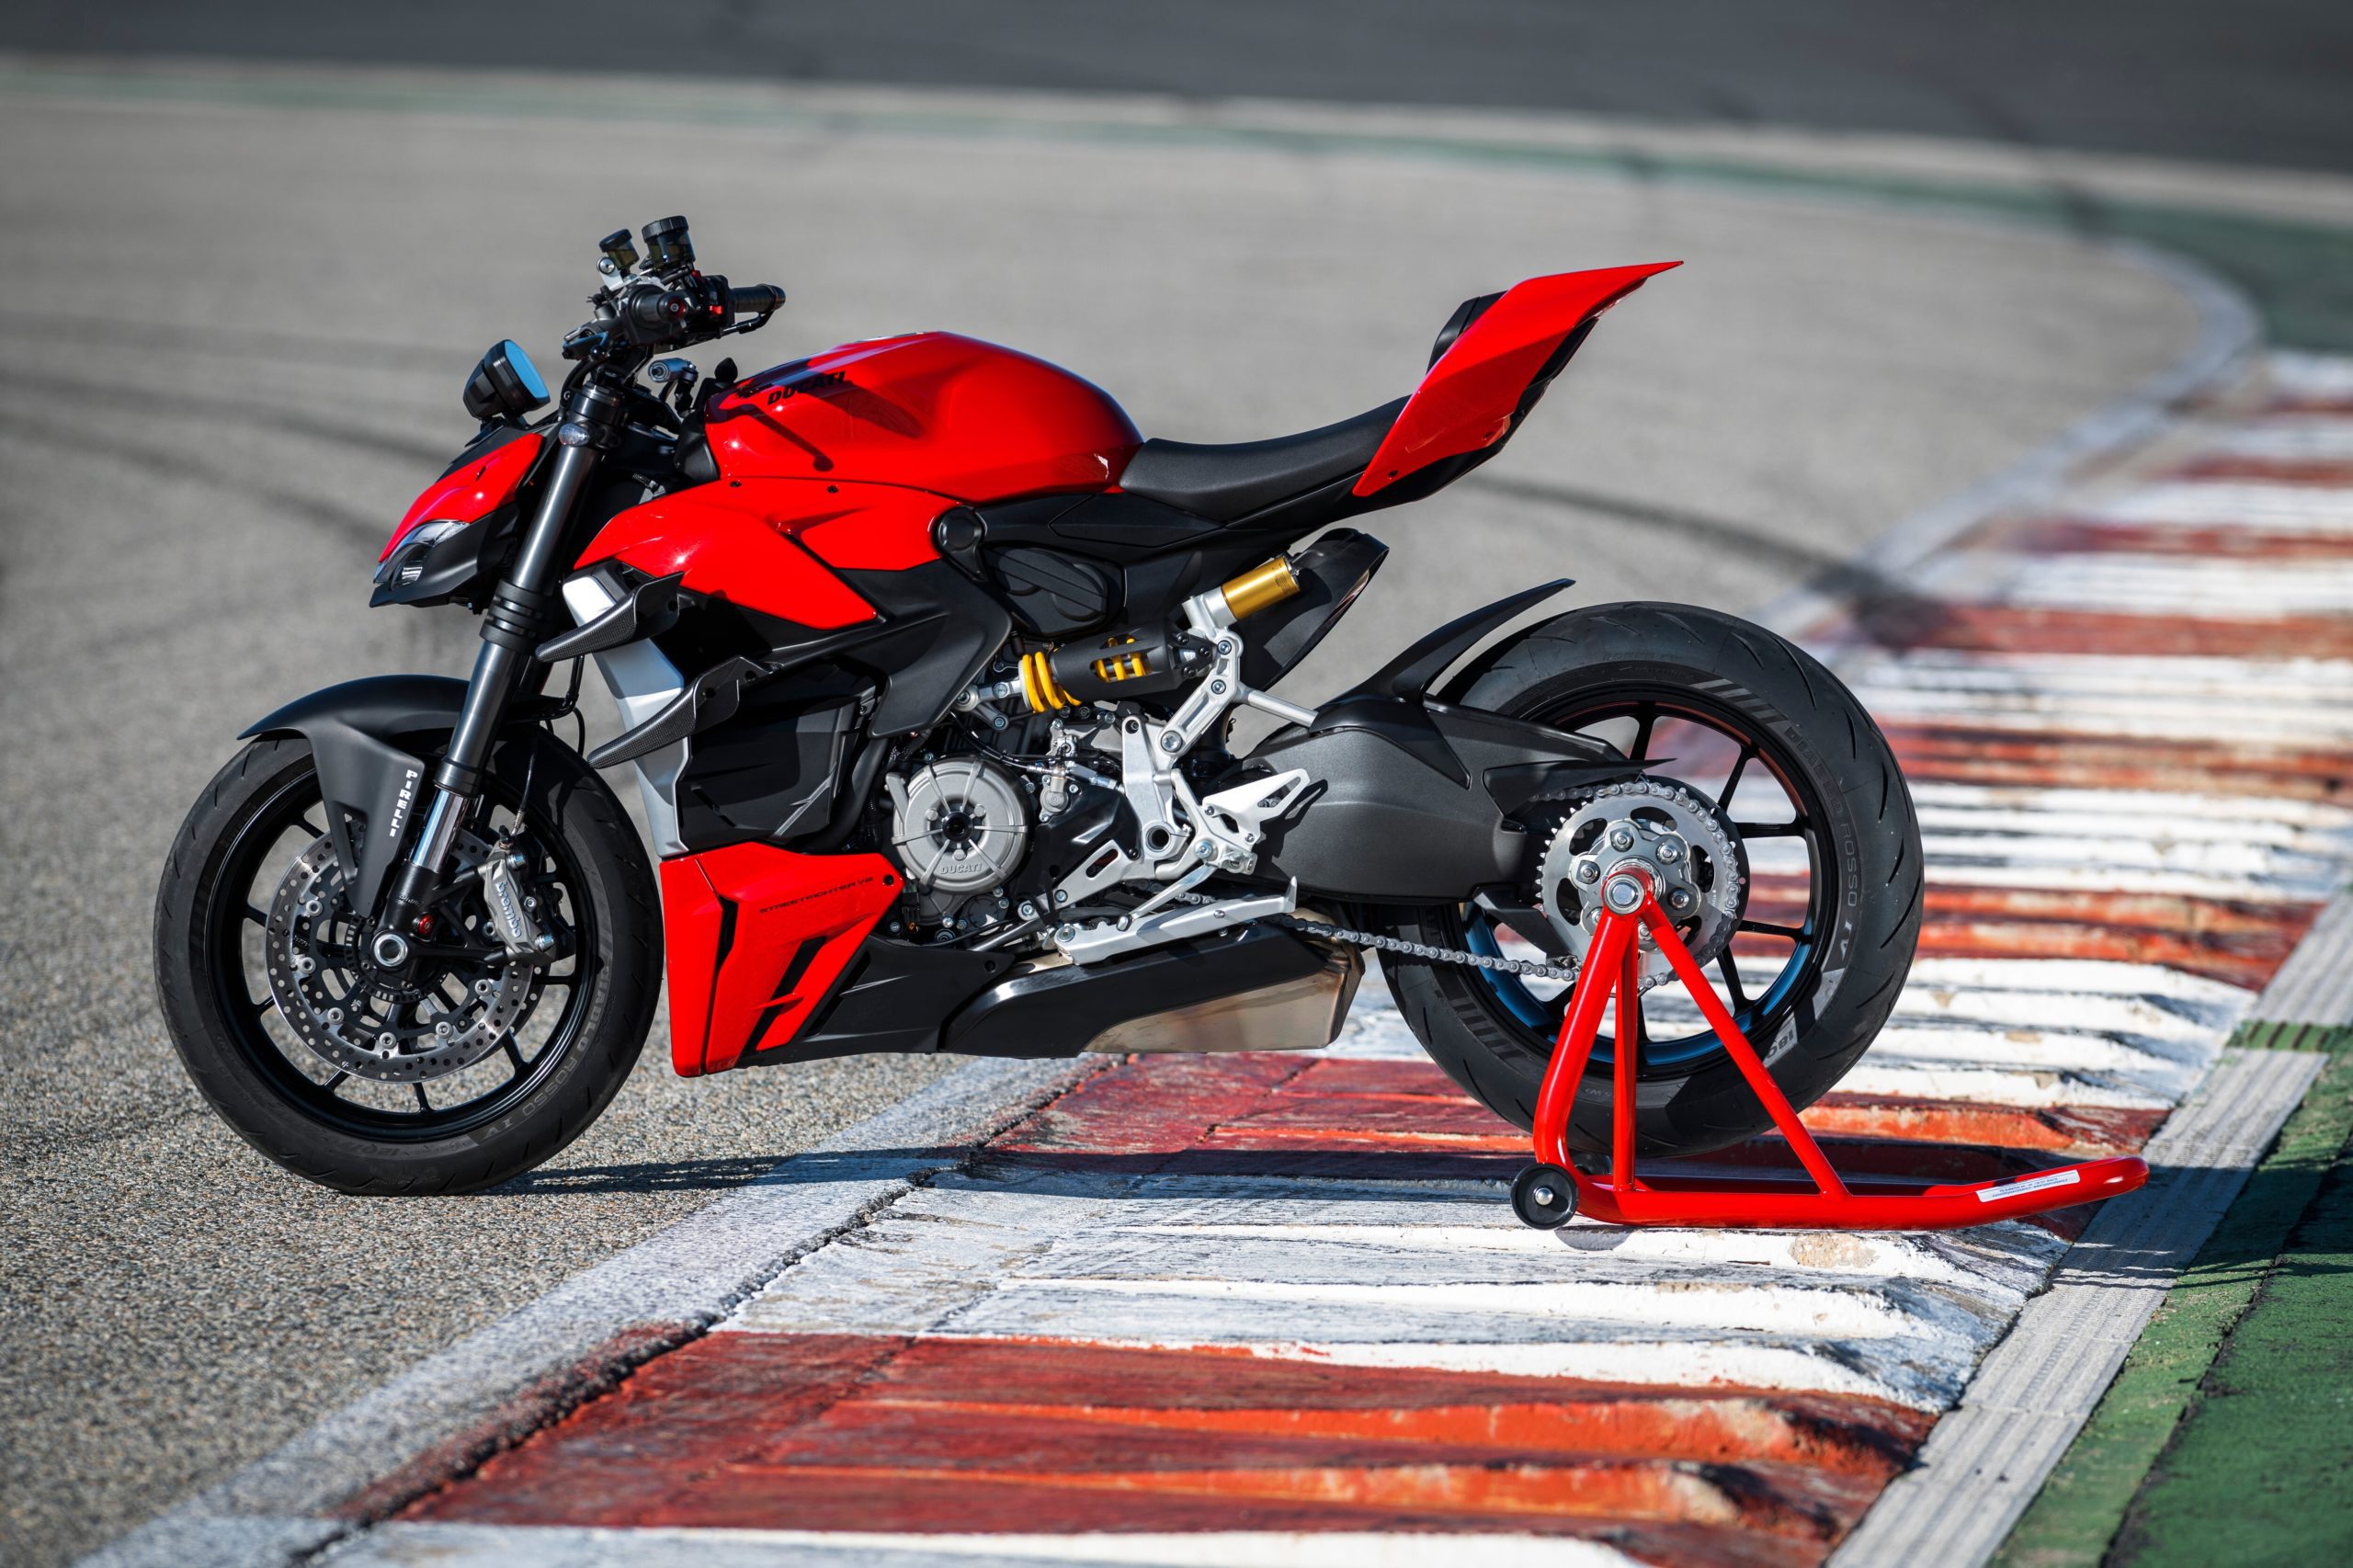 Static image of the Ducati Streetfighter V2 on a racetrack